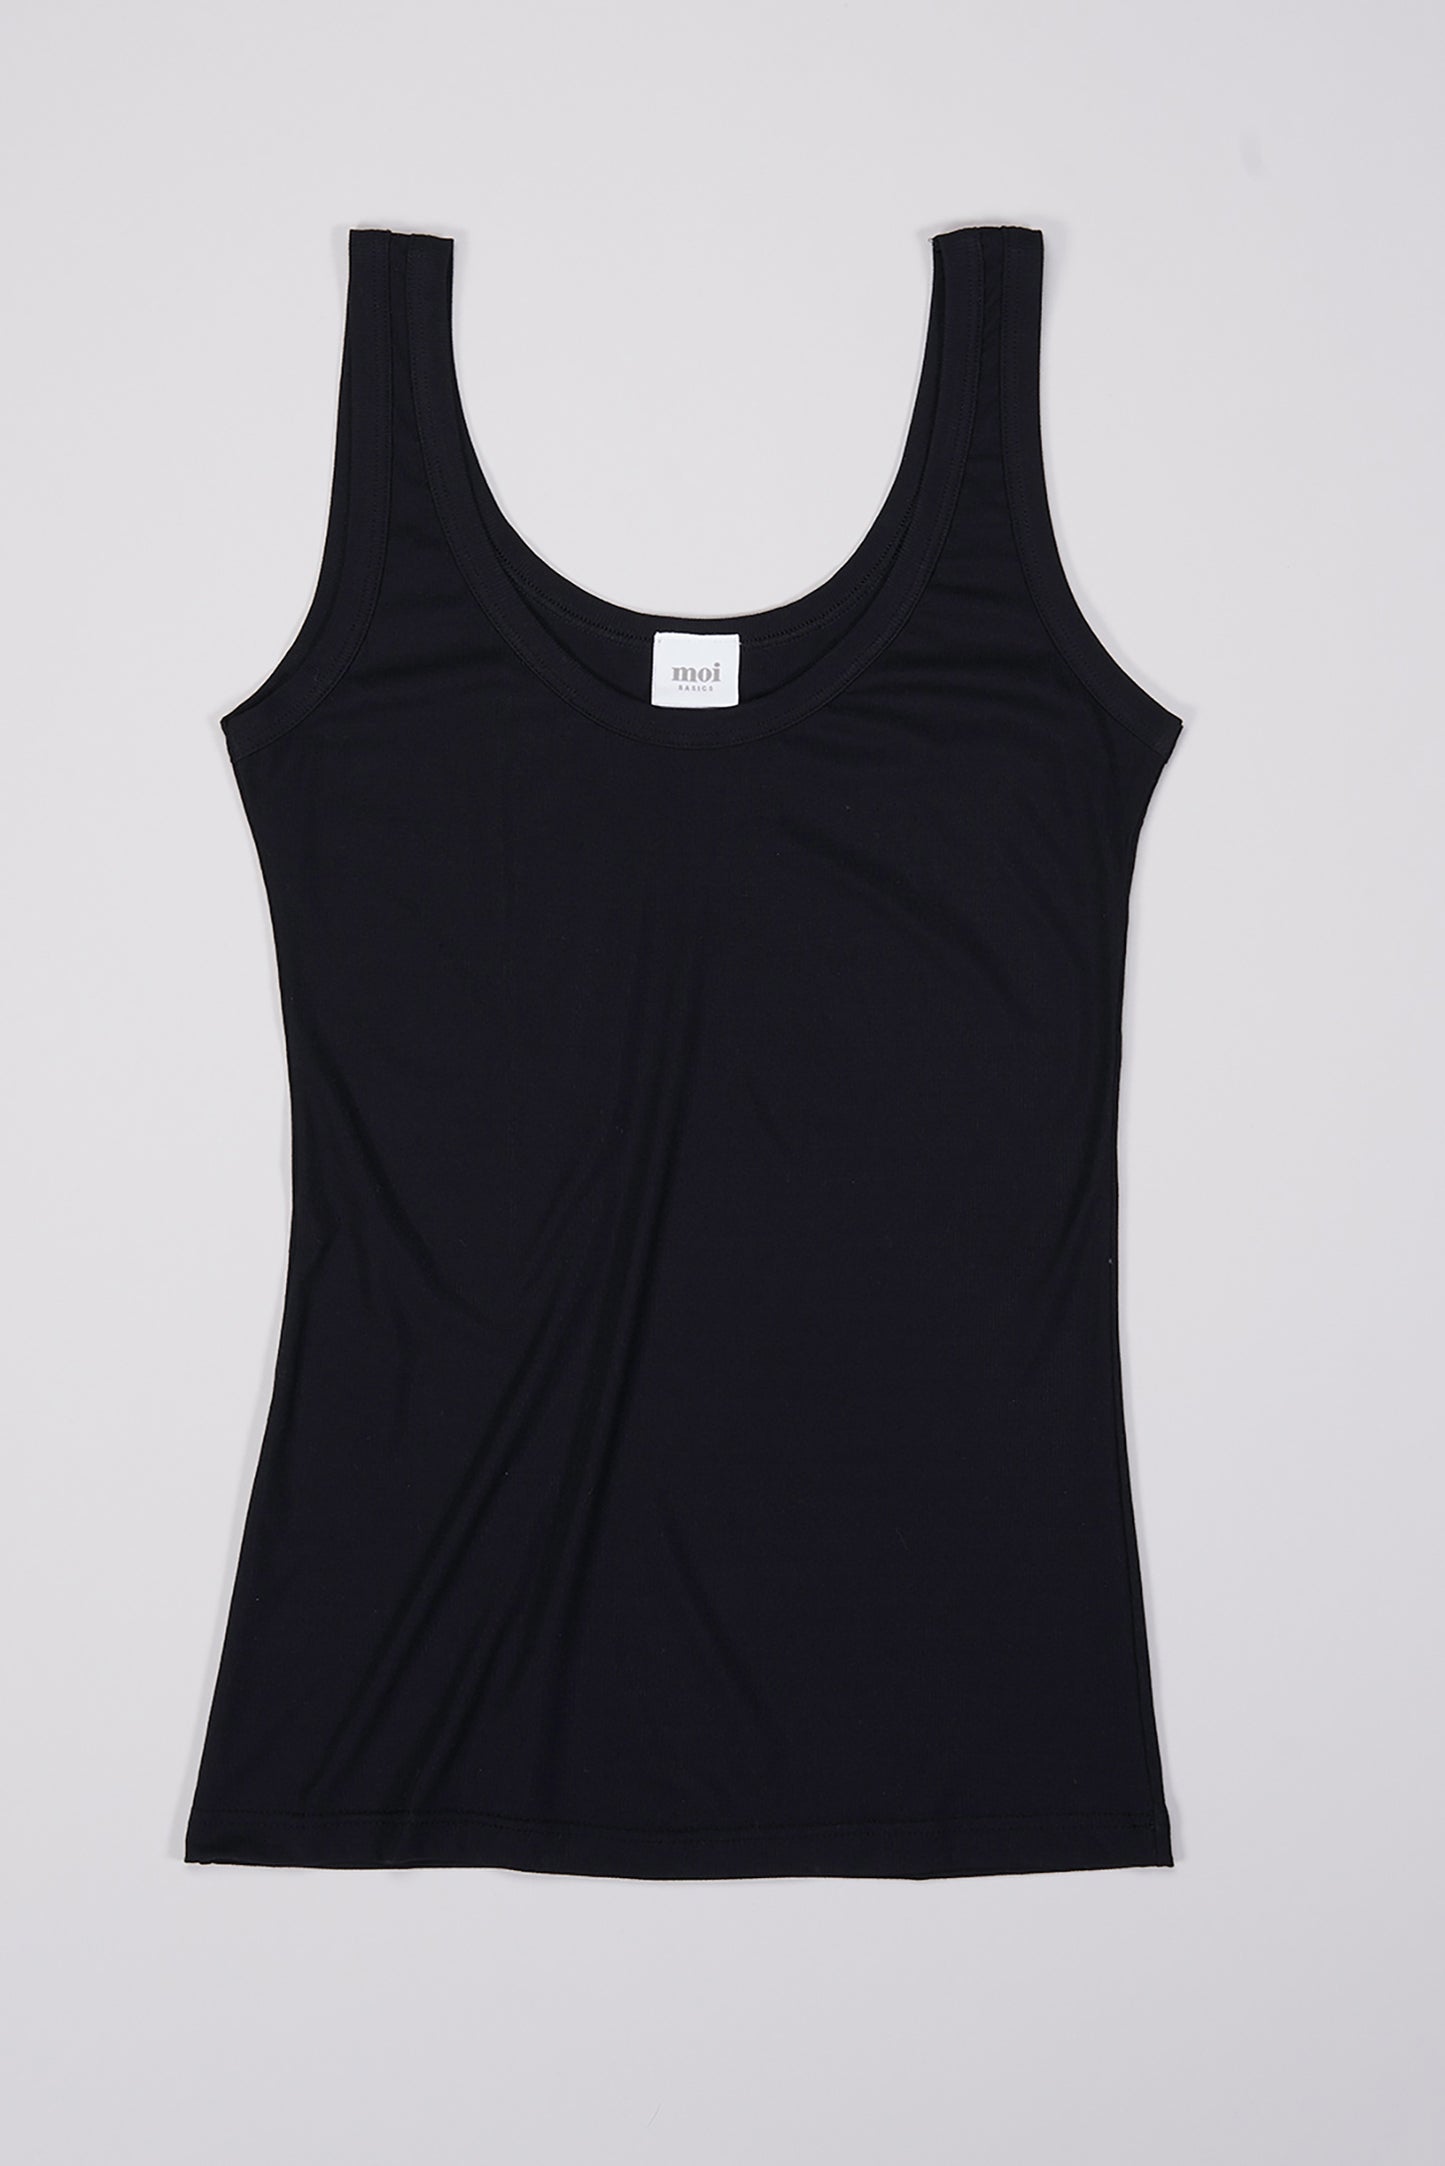 Load image into Gallery viewer, TANKTOP - BLACK
